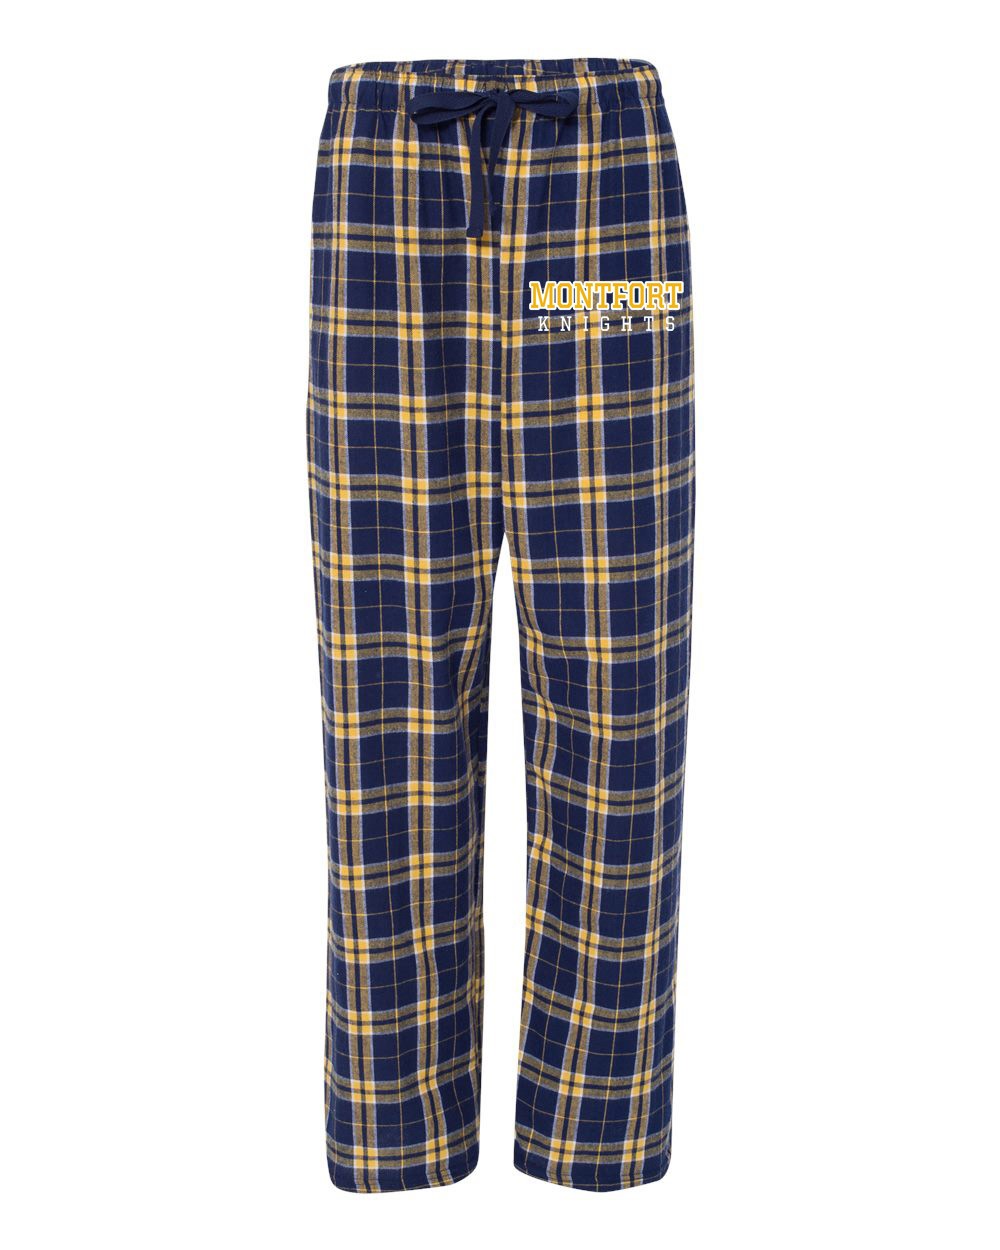 Montfort Spirit Pajama Pants w/ Knights Logo - Please Allow 2-3 Weeks for Delivery